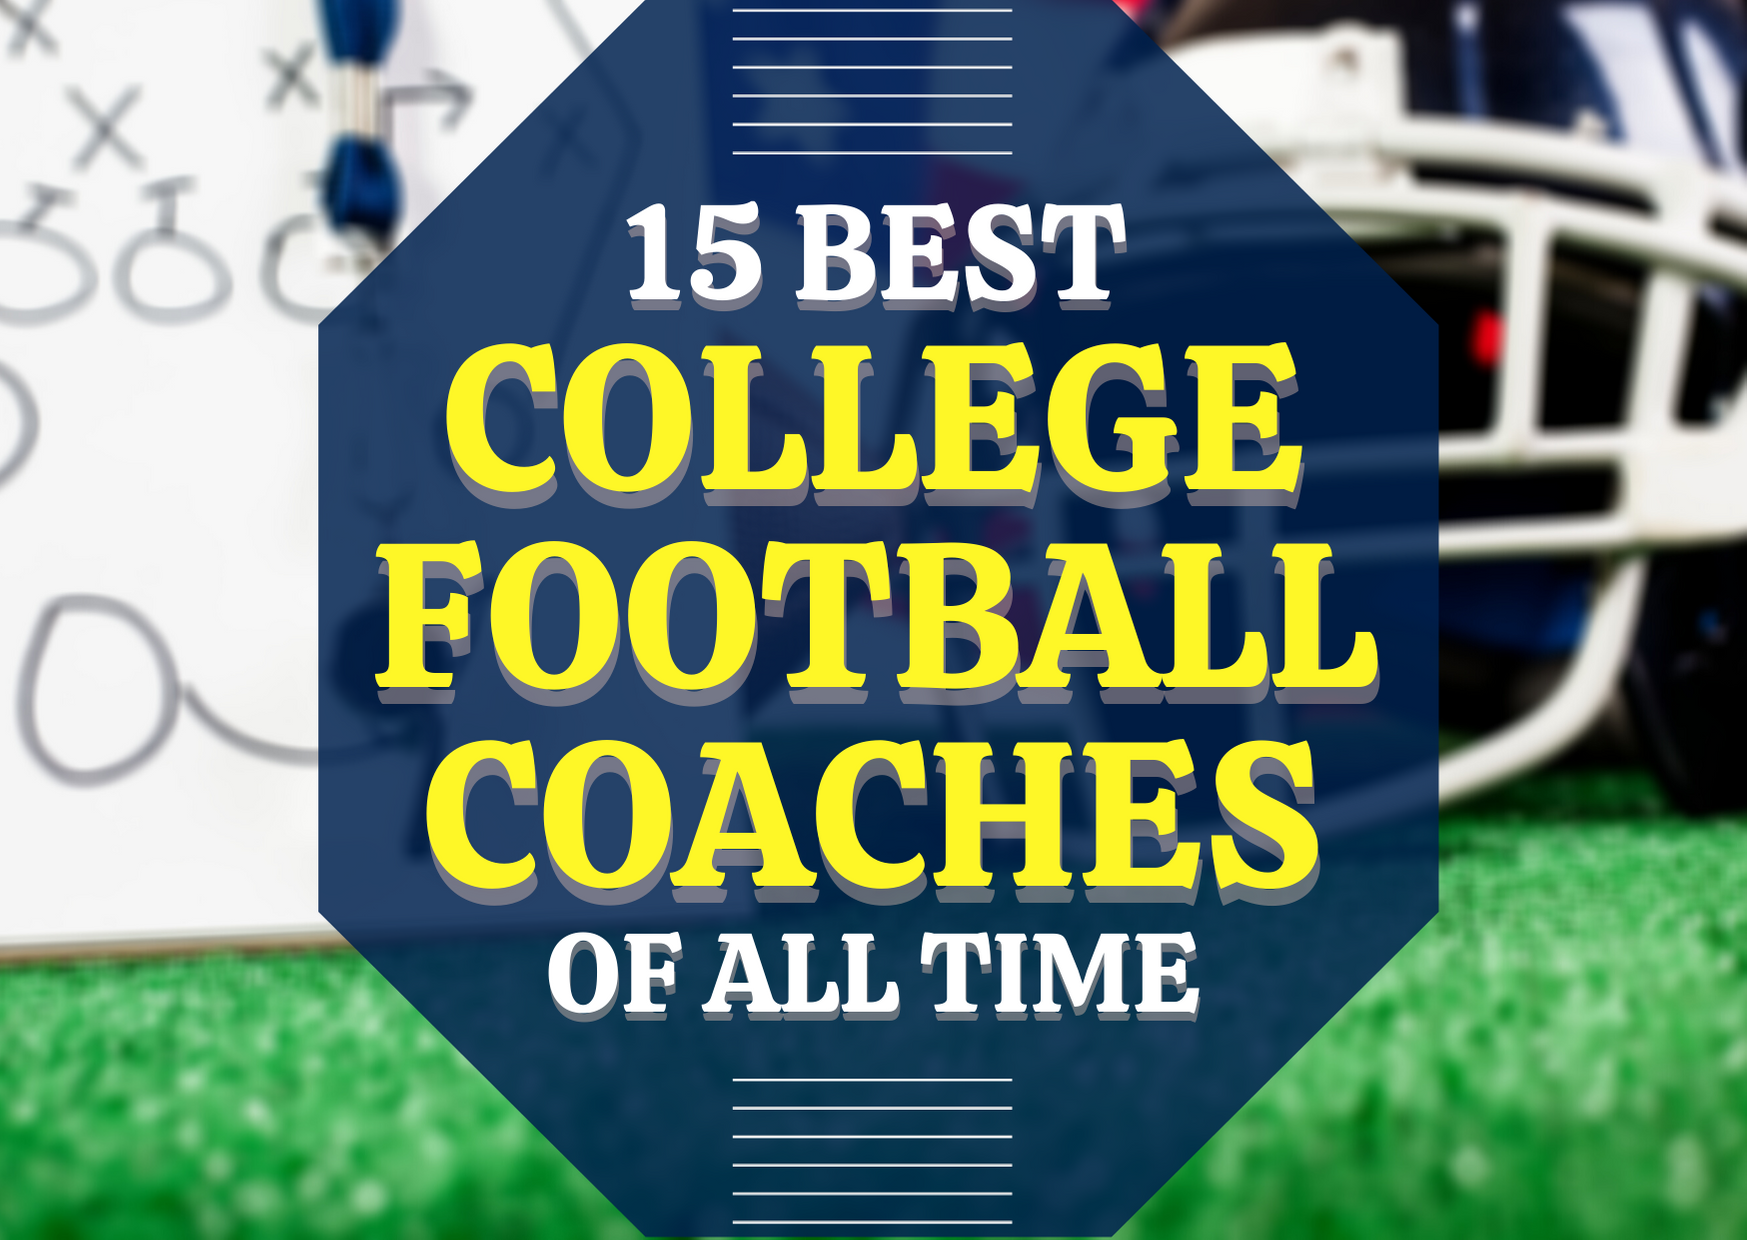 15 Best College Football Coaches of All Time - College Cliffs